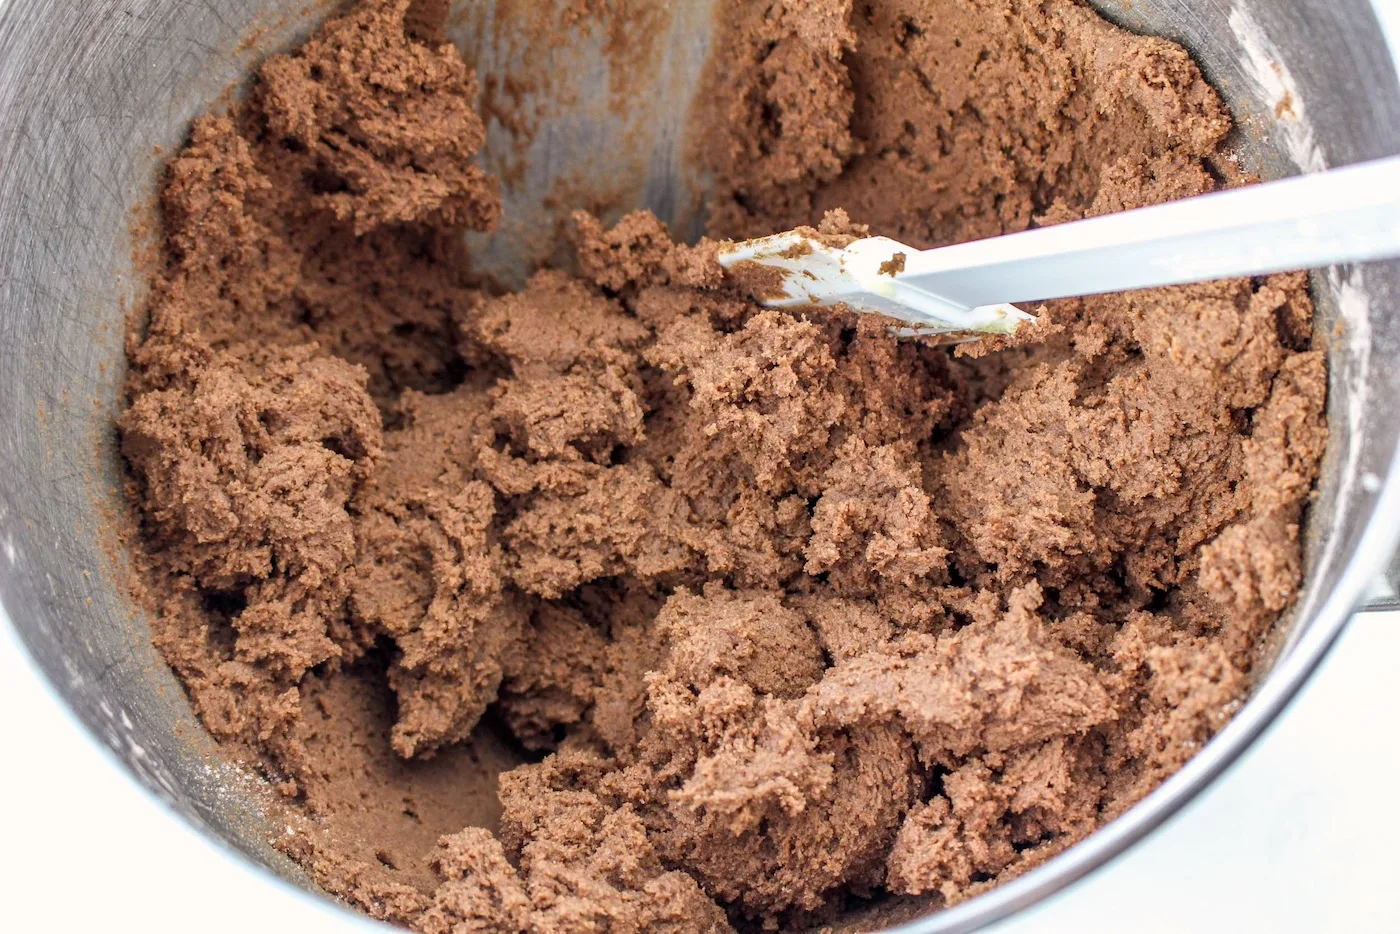 wet and dry ingredients mixed together to form chocolate dough